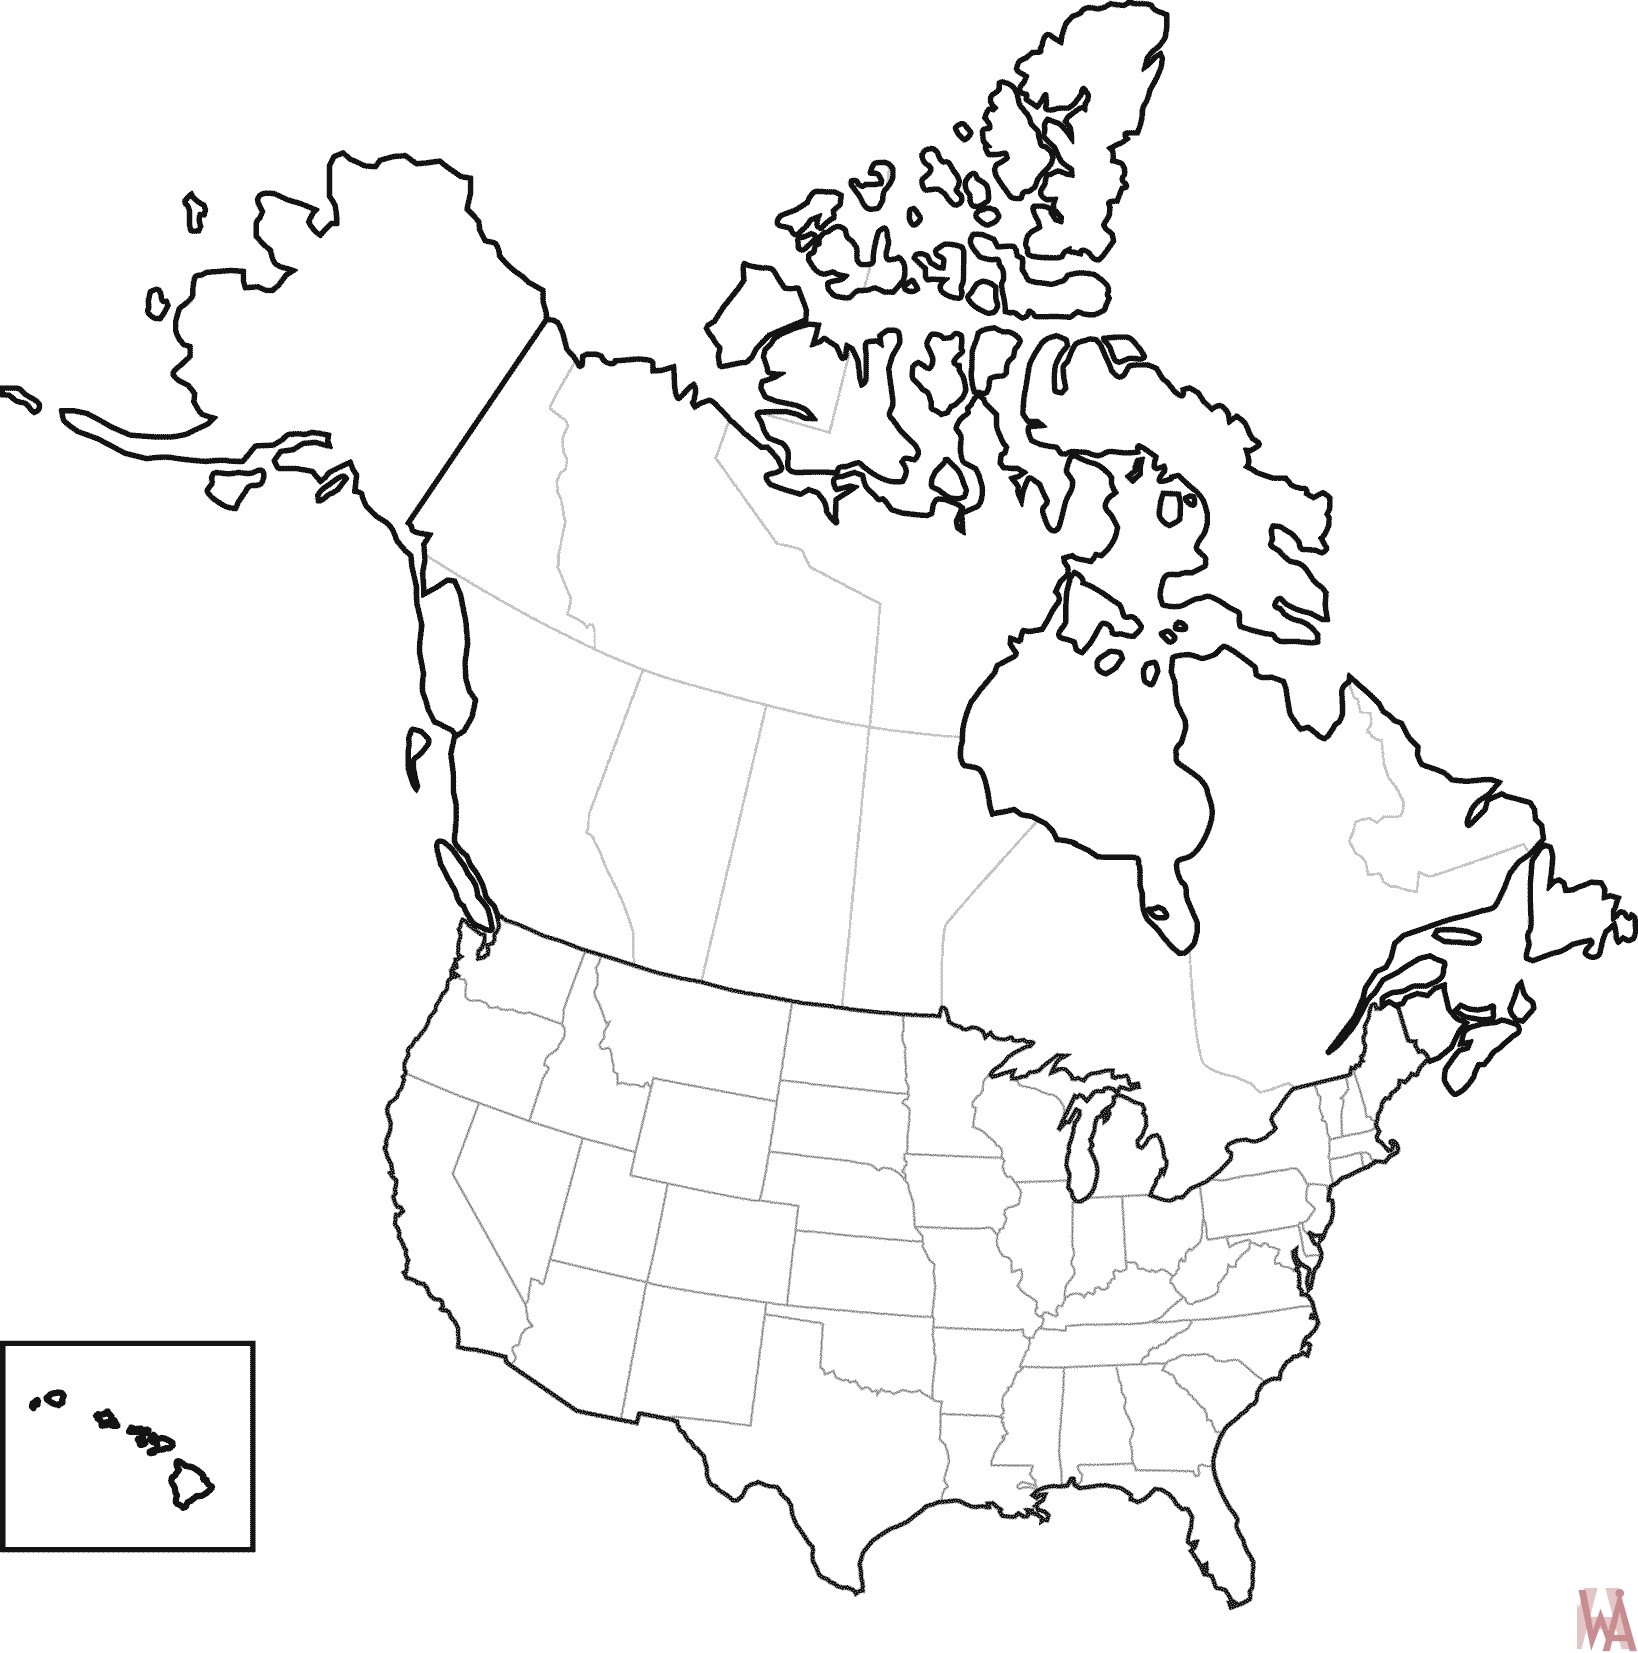 map of us and canada blank Blank Outline Map Of The United States And Canada Whatsanswer map of us and canada blank